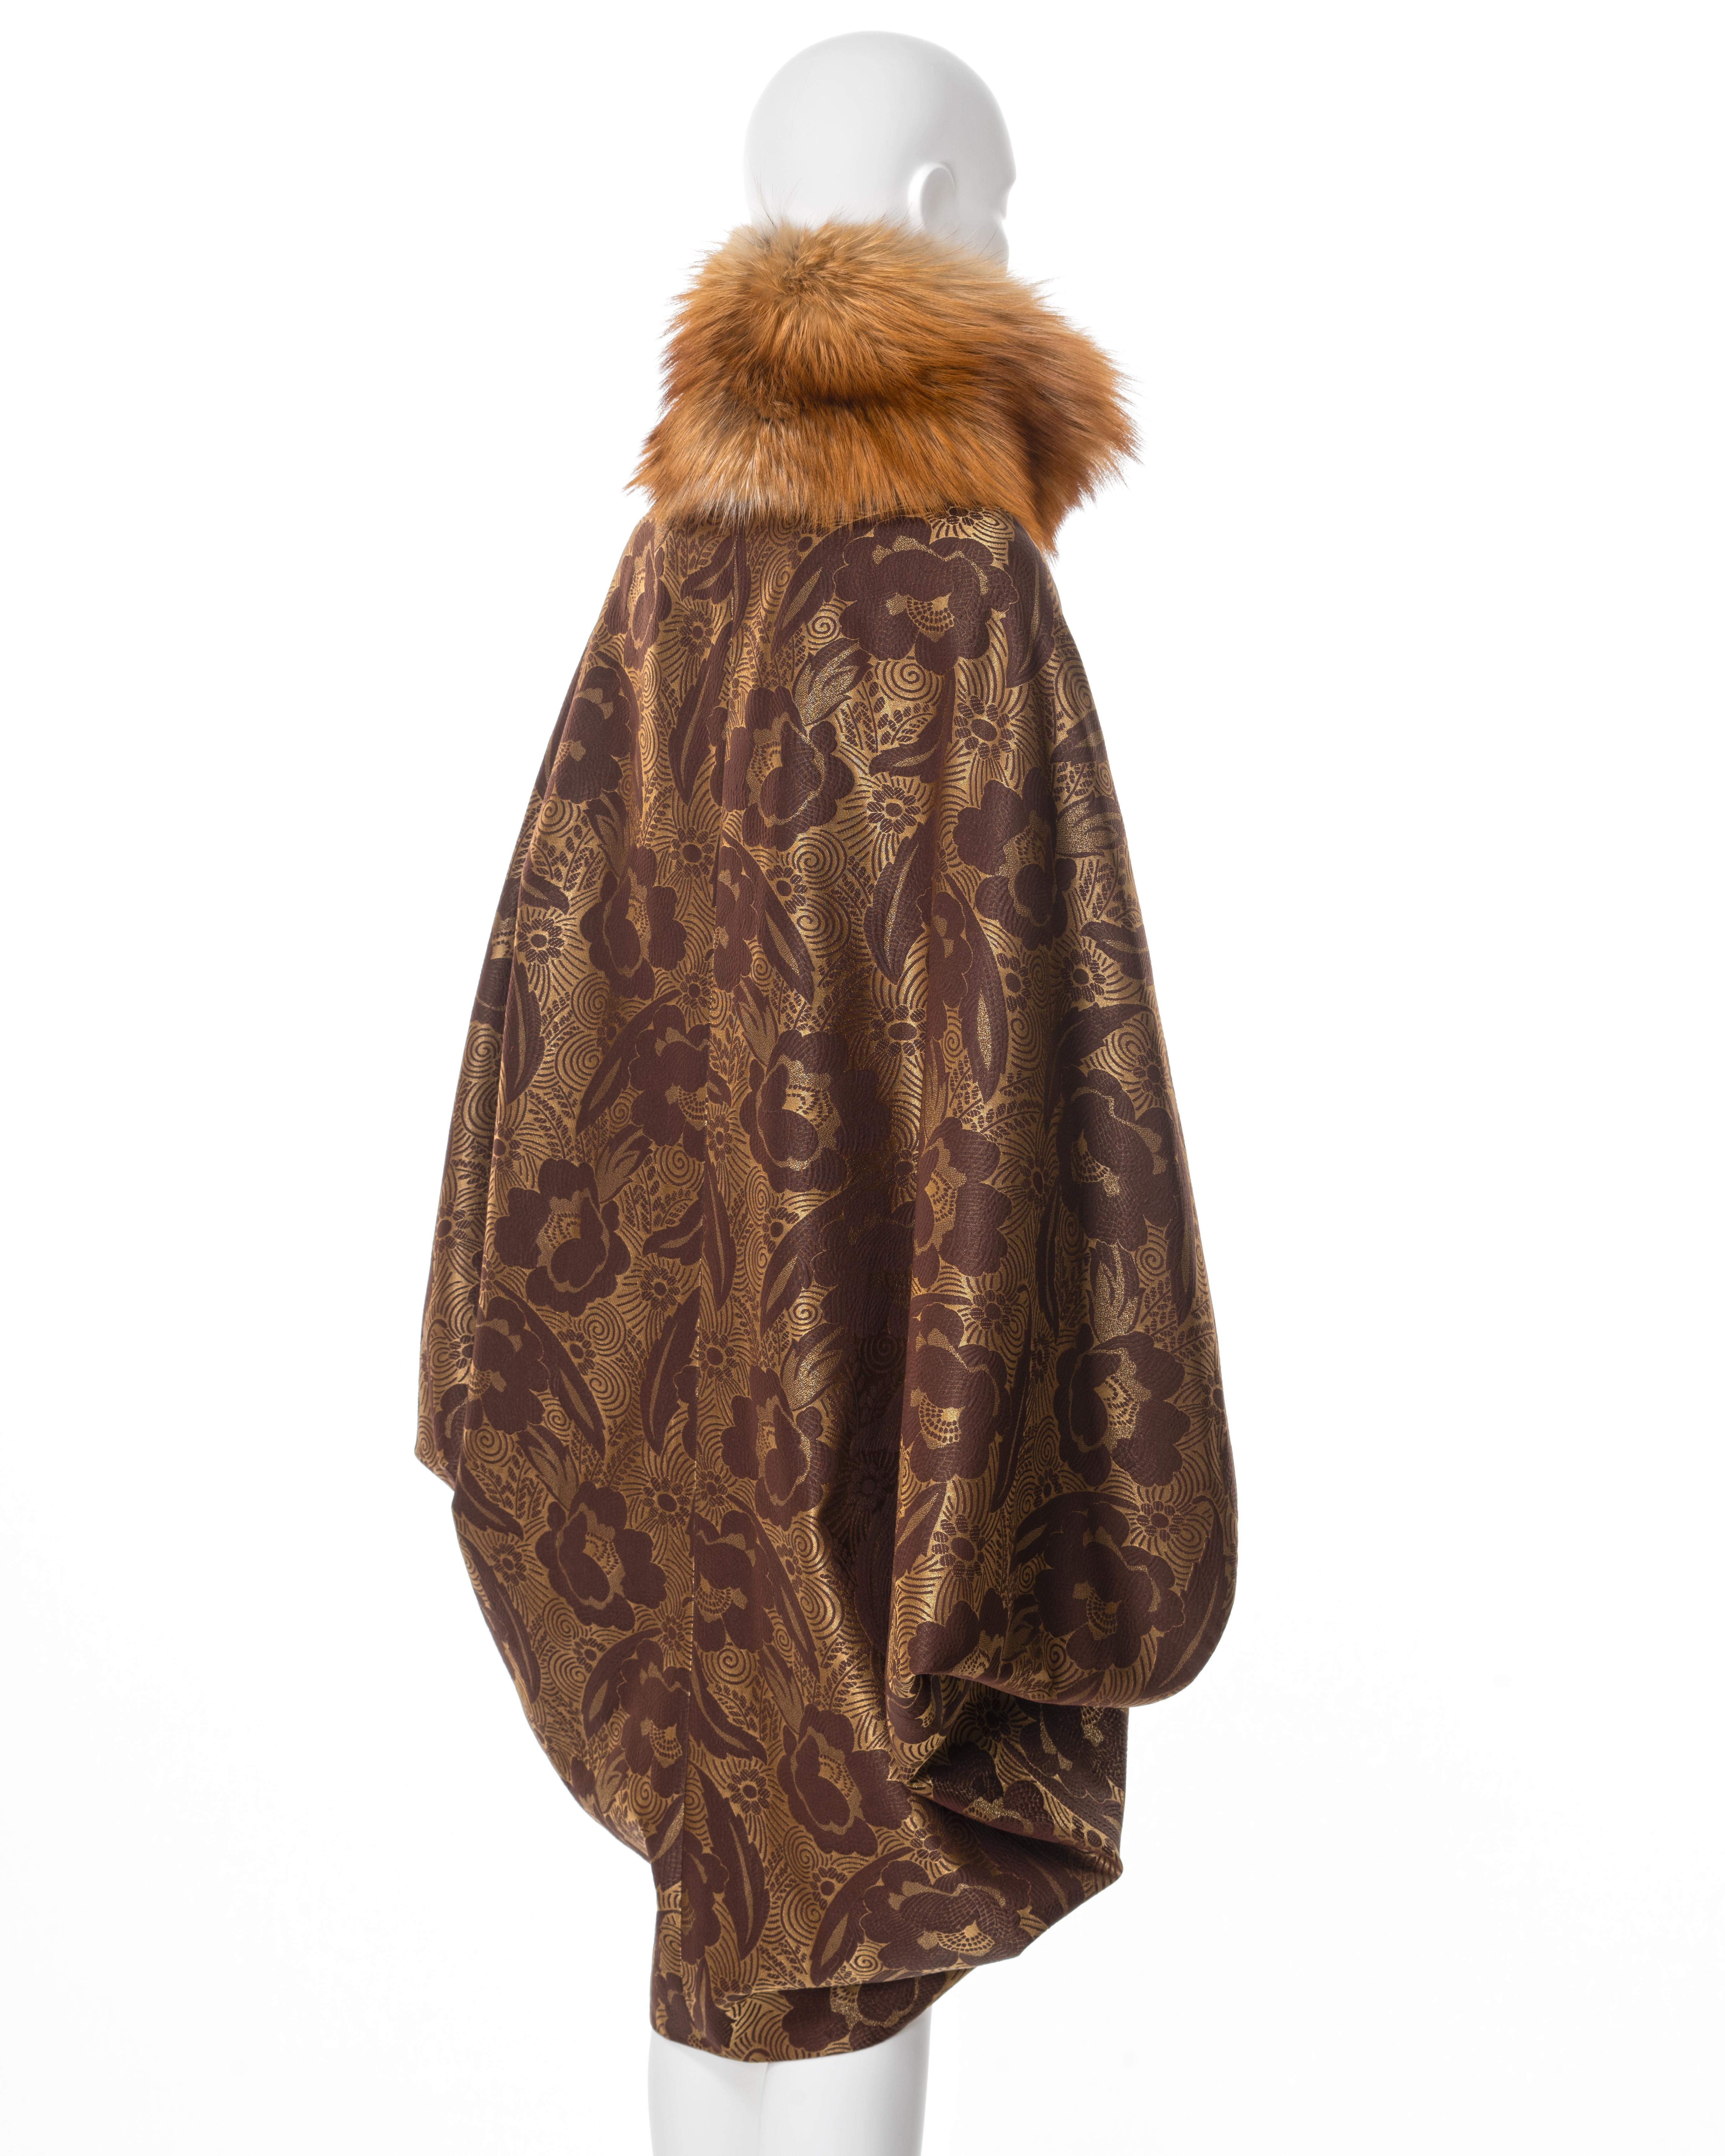 Christian Dior by John Galliano silk cocoon coat with fox fur collar, ss 2008 For Sale 2